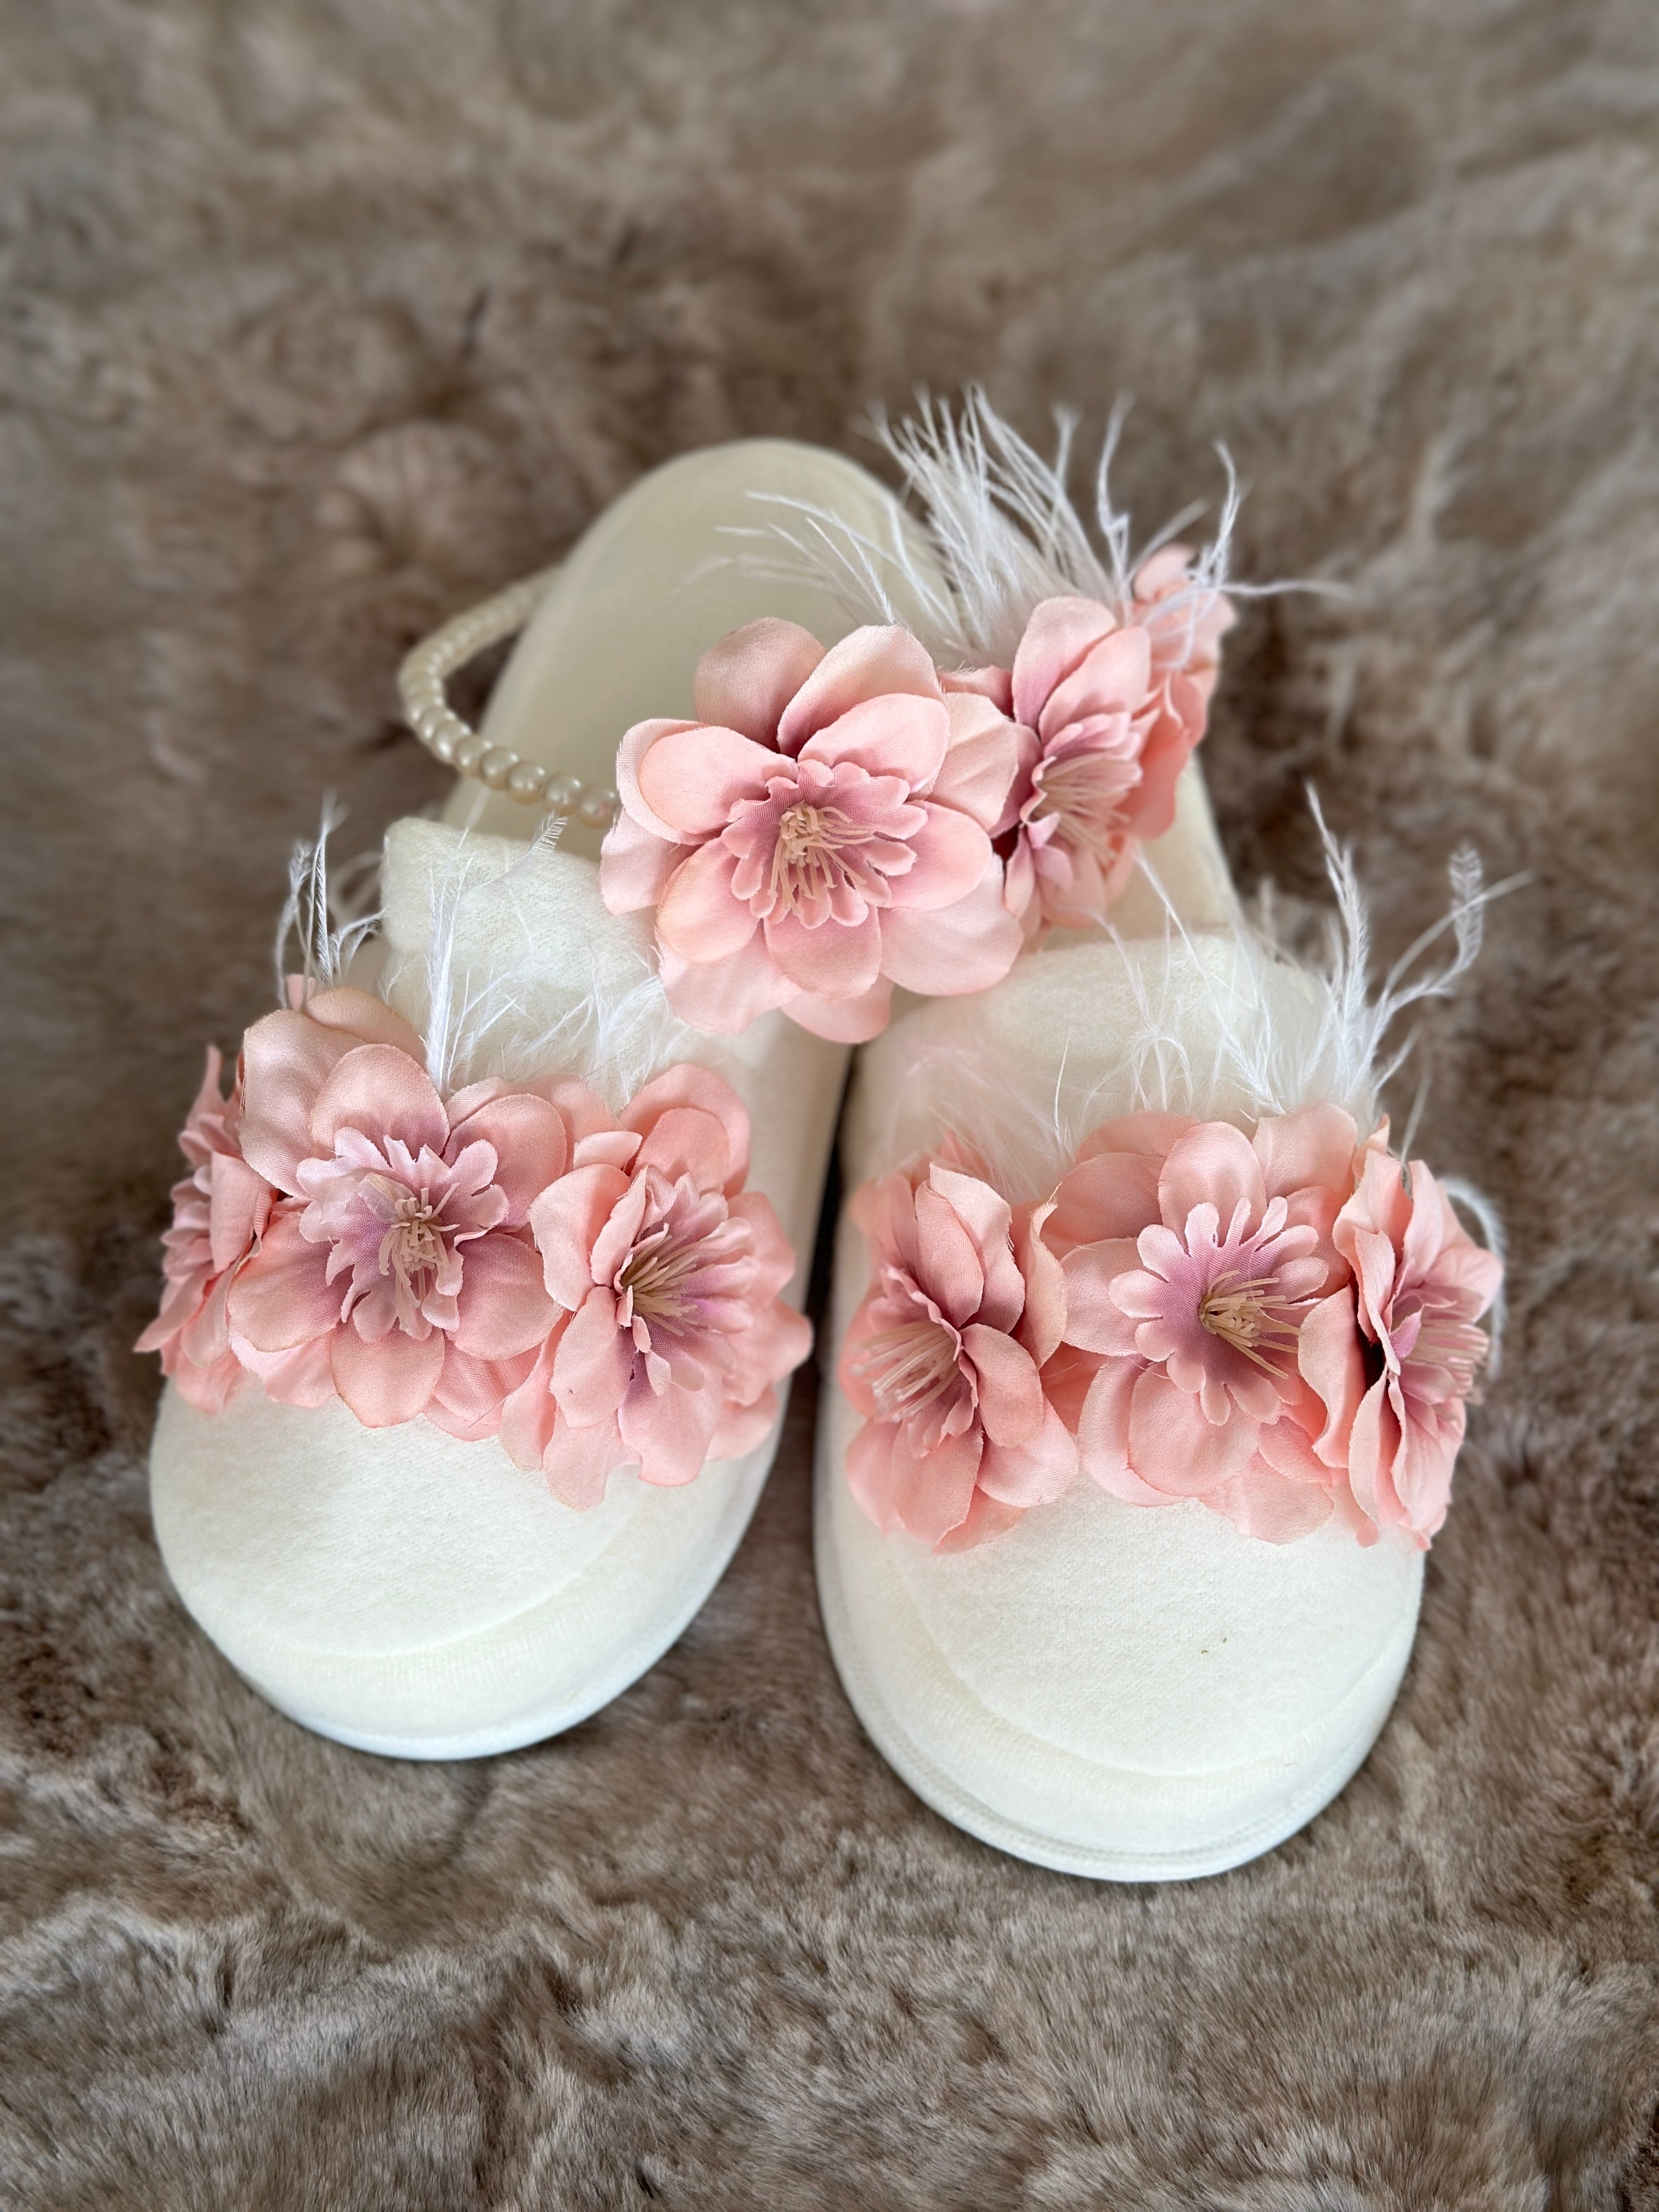 Shopymommy 757104 Water Lily Flowered Maternity Crown & Maternity Slippers Set Pink